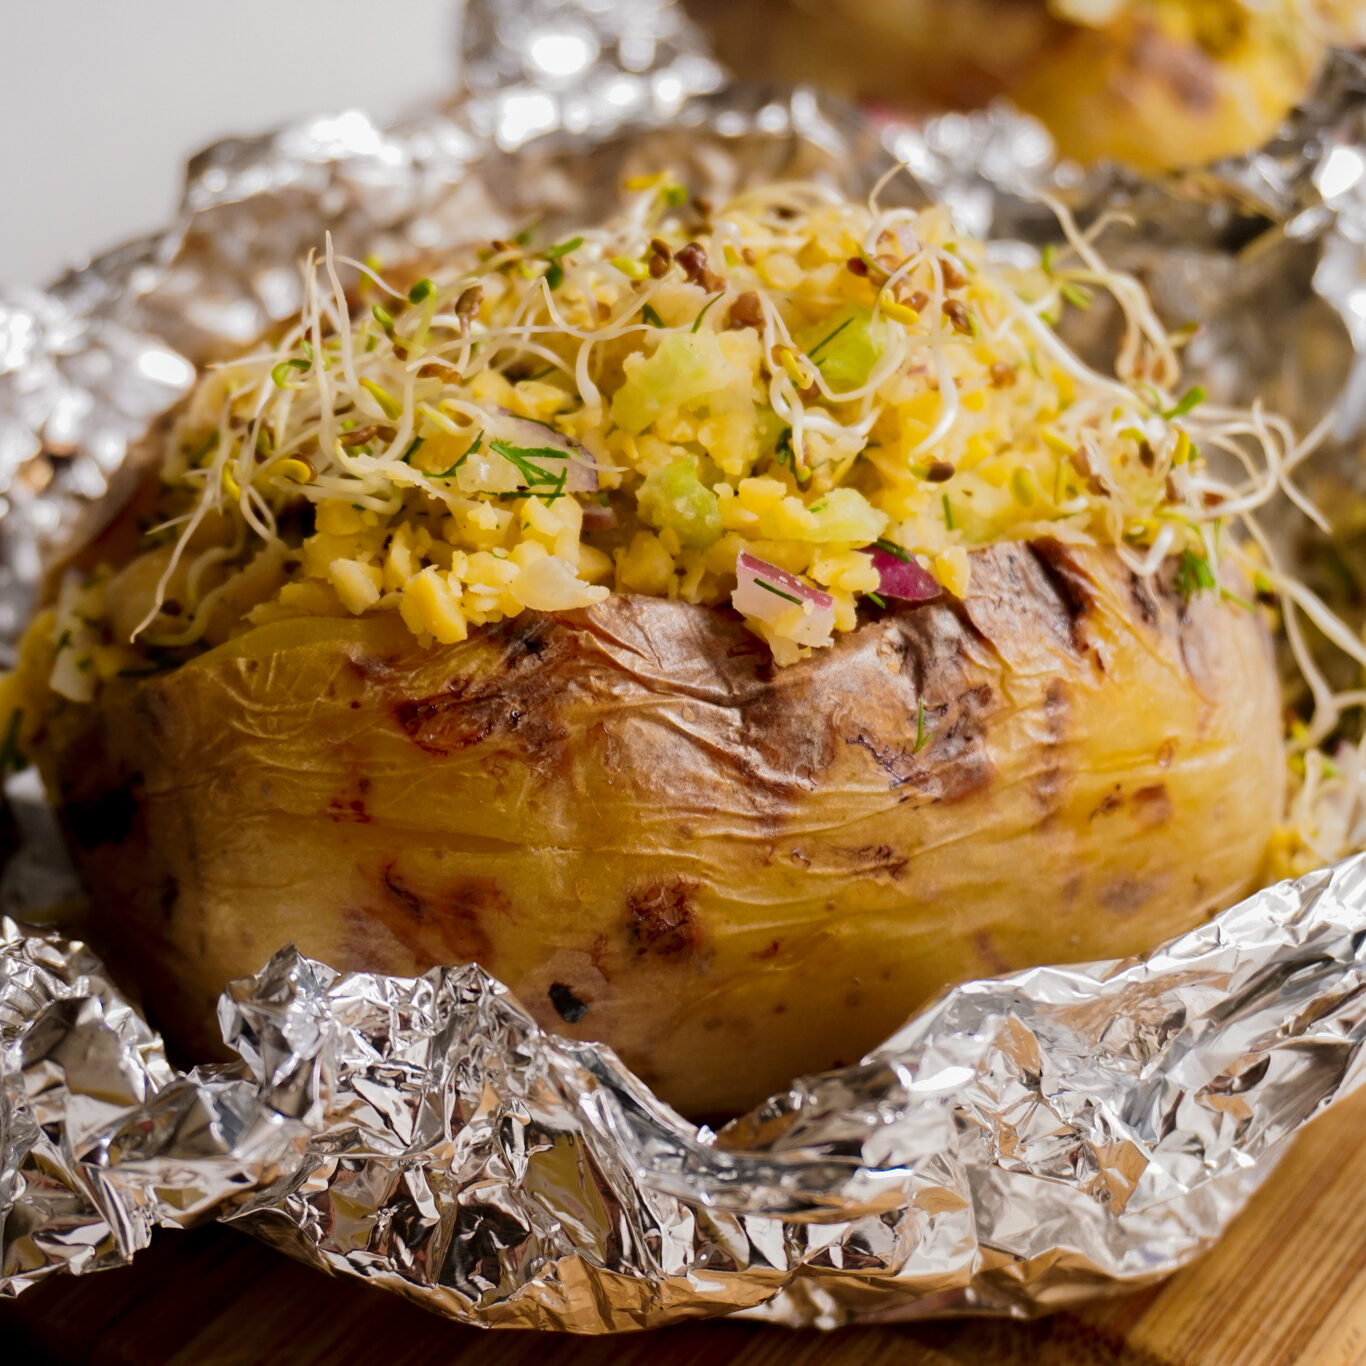 Baked-Potato-with-Crushed-Chickpea-Salad-1